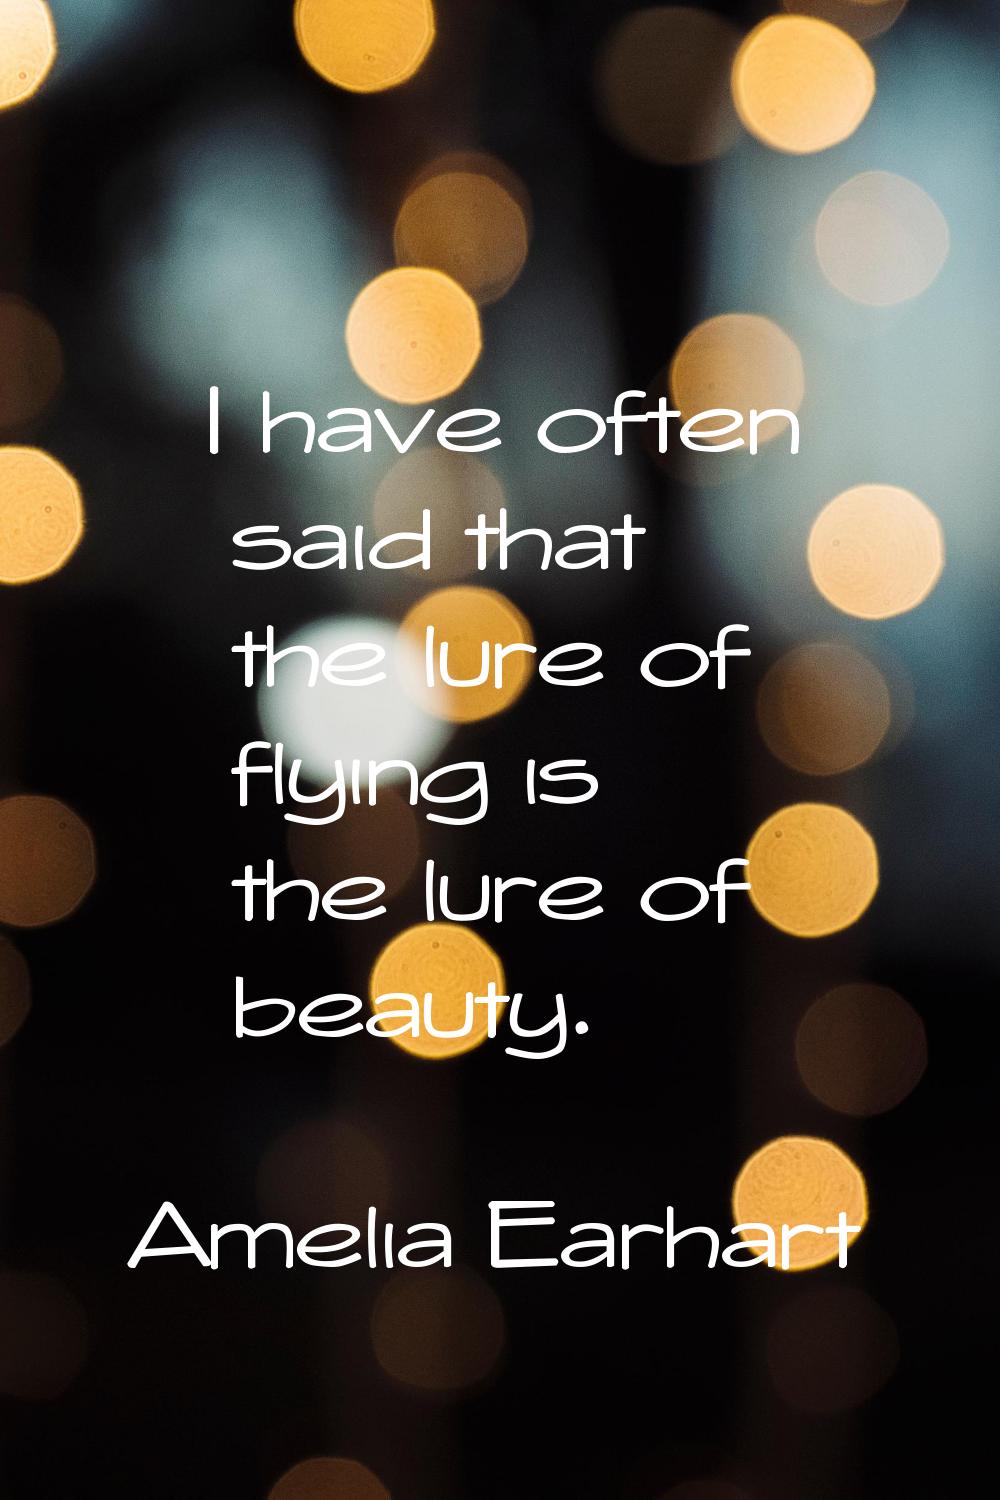 I have often said that the lure of flying is the lure of beauty.